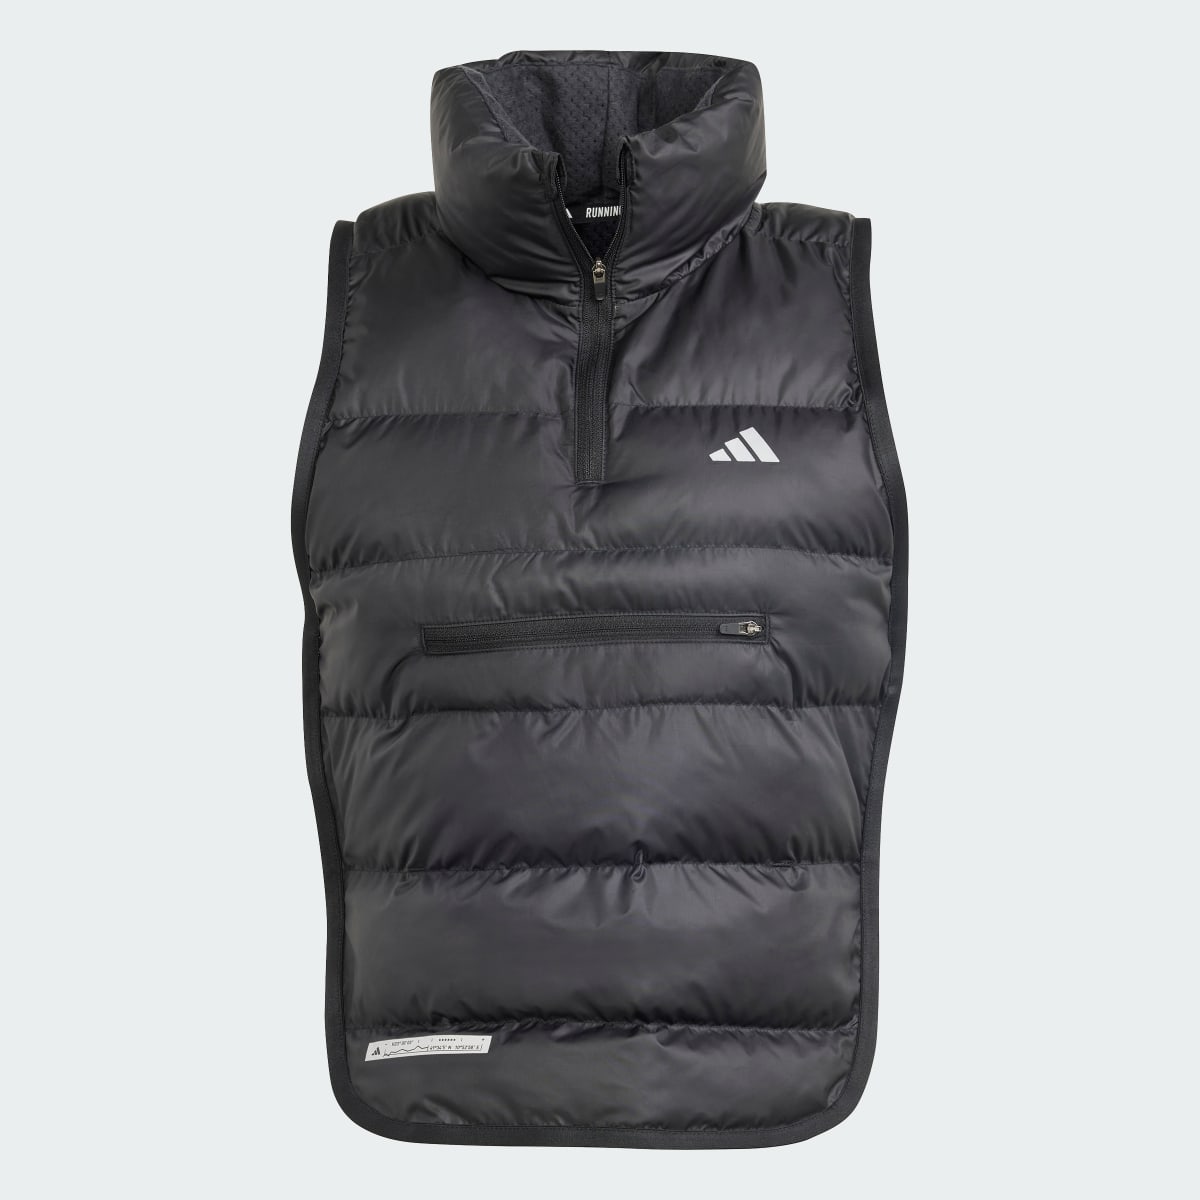 Adidas Ultimate Running Conquer the Elements Body Warmer Vest. 5